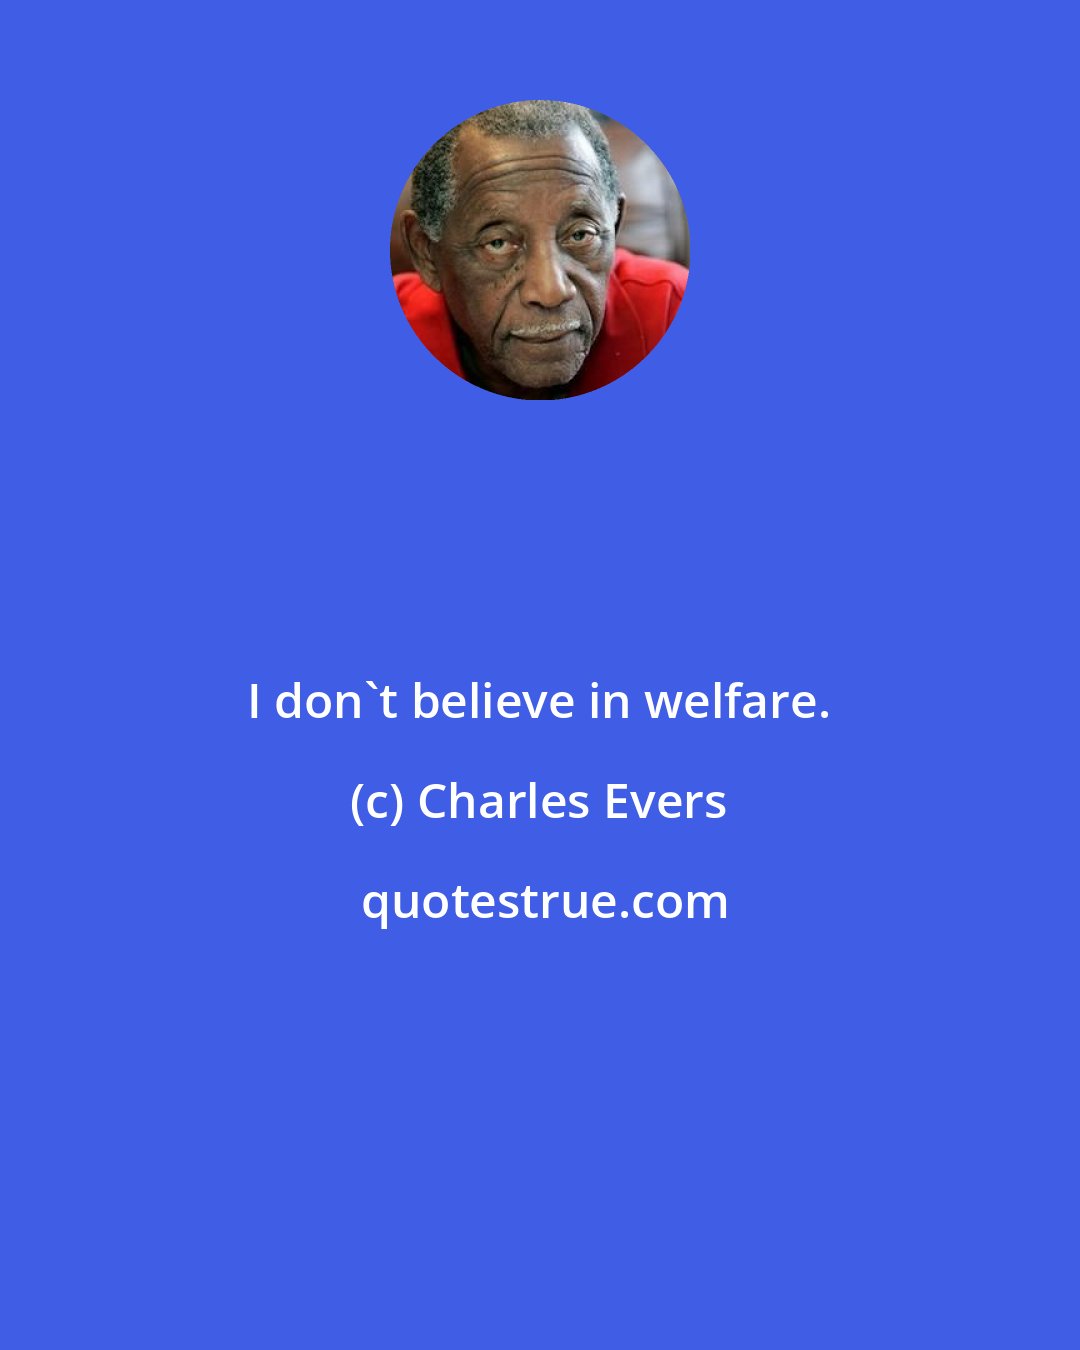 Charles Evers: I don't believe in welfare.